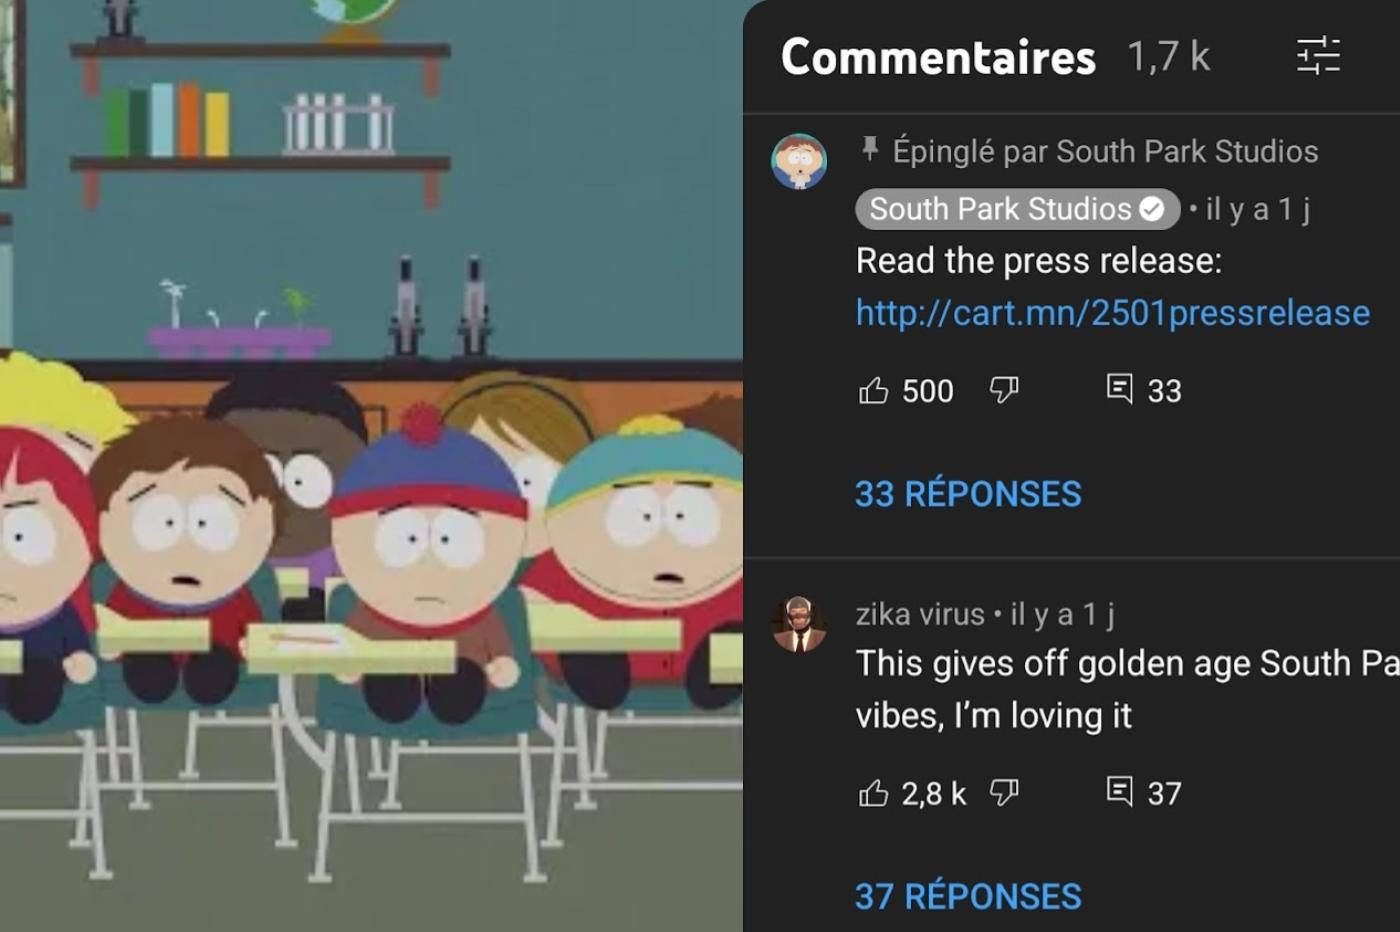 South Park Youtube commentaire 